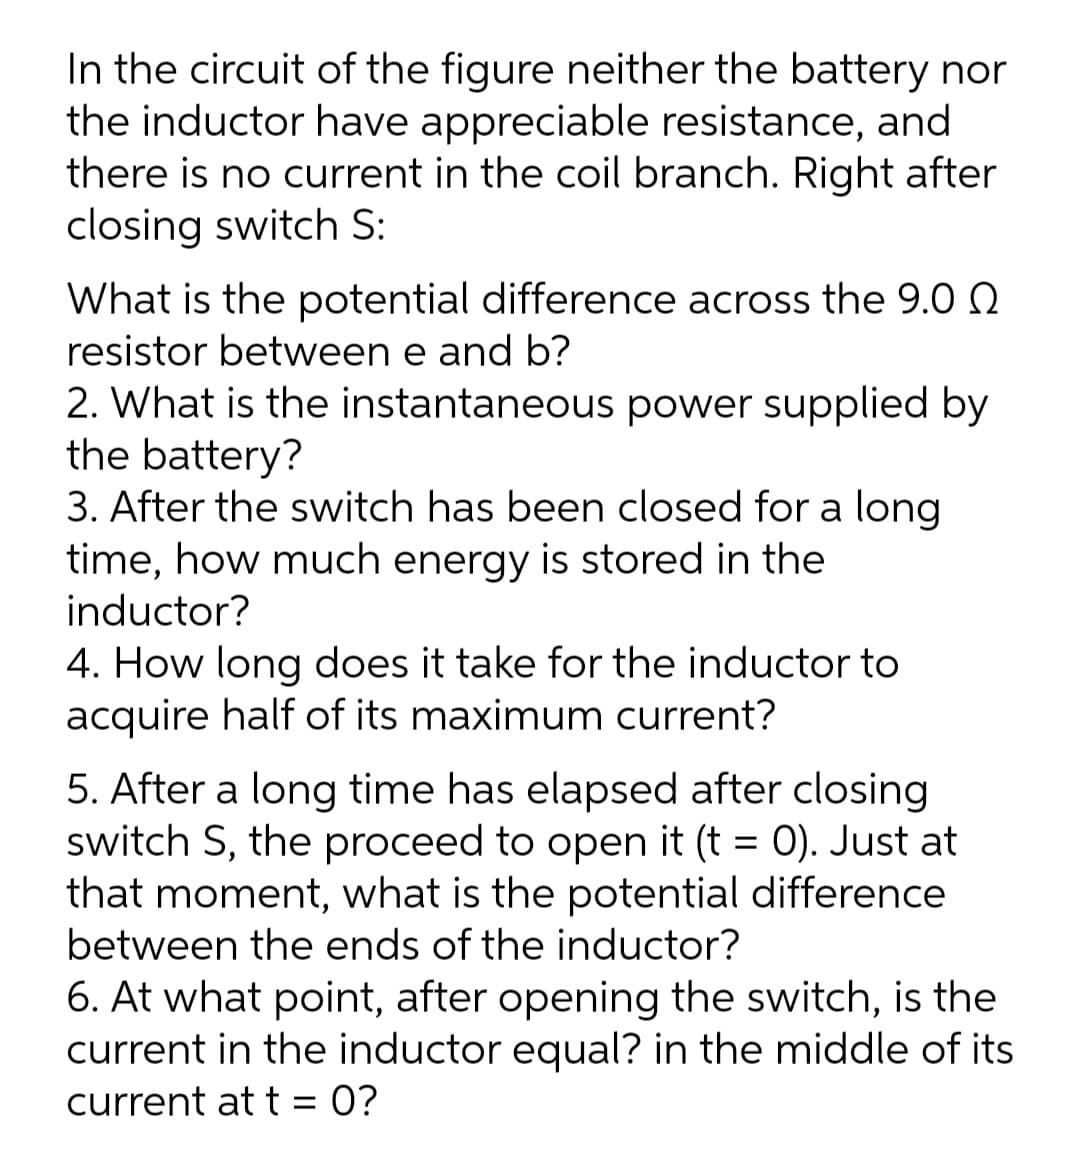 In the circuit of the figure neither the battery nor
the inductor have appreciable resistance, and
there is no current in the coil branch. Right after
closing switch S:
What is the potential difference across the 9.0 N
resistor between e and b?
2. What is the instantaneous power supplied by
the battery?
3. After the switch has been closed for a long
time, how much energy is stored in the
inductor?
4. How long does it take for the inductor to
acquire half of its maximum current?
5. After a long time has elapsed after closing
switch S, the proceed to open it (t = 0). Just at
that moment, what is the potential difference
between the ends of the inductor?
6. At what point, after opening the switch, is the
current in the inductor equal? in the middle of its
current at t = 0?
